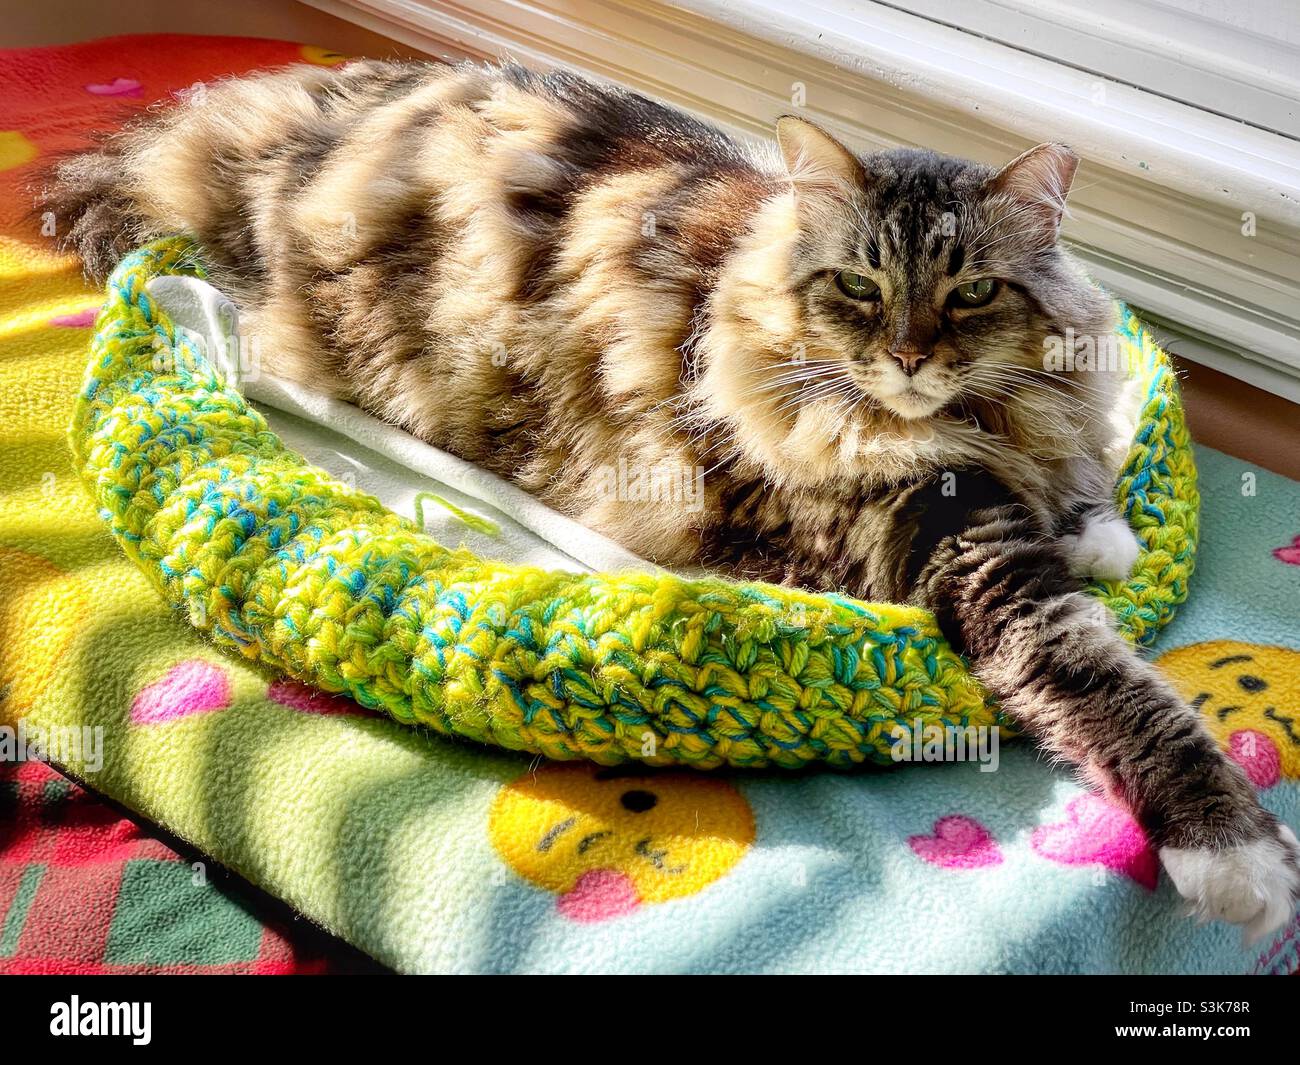 Beautiful long haired kitty cat basking in sunlight streaming through a nearby window. Stock Photo